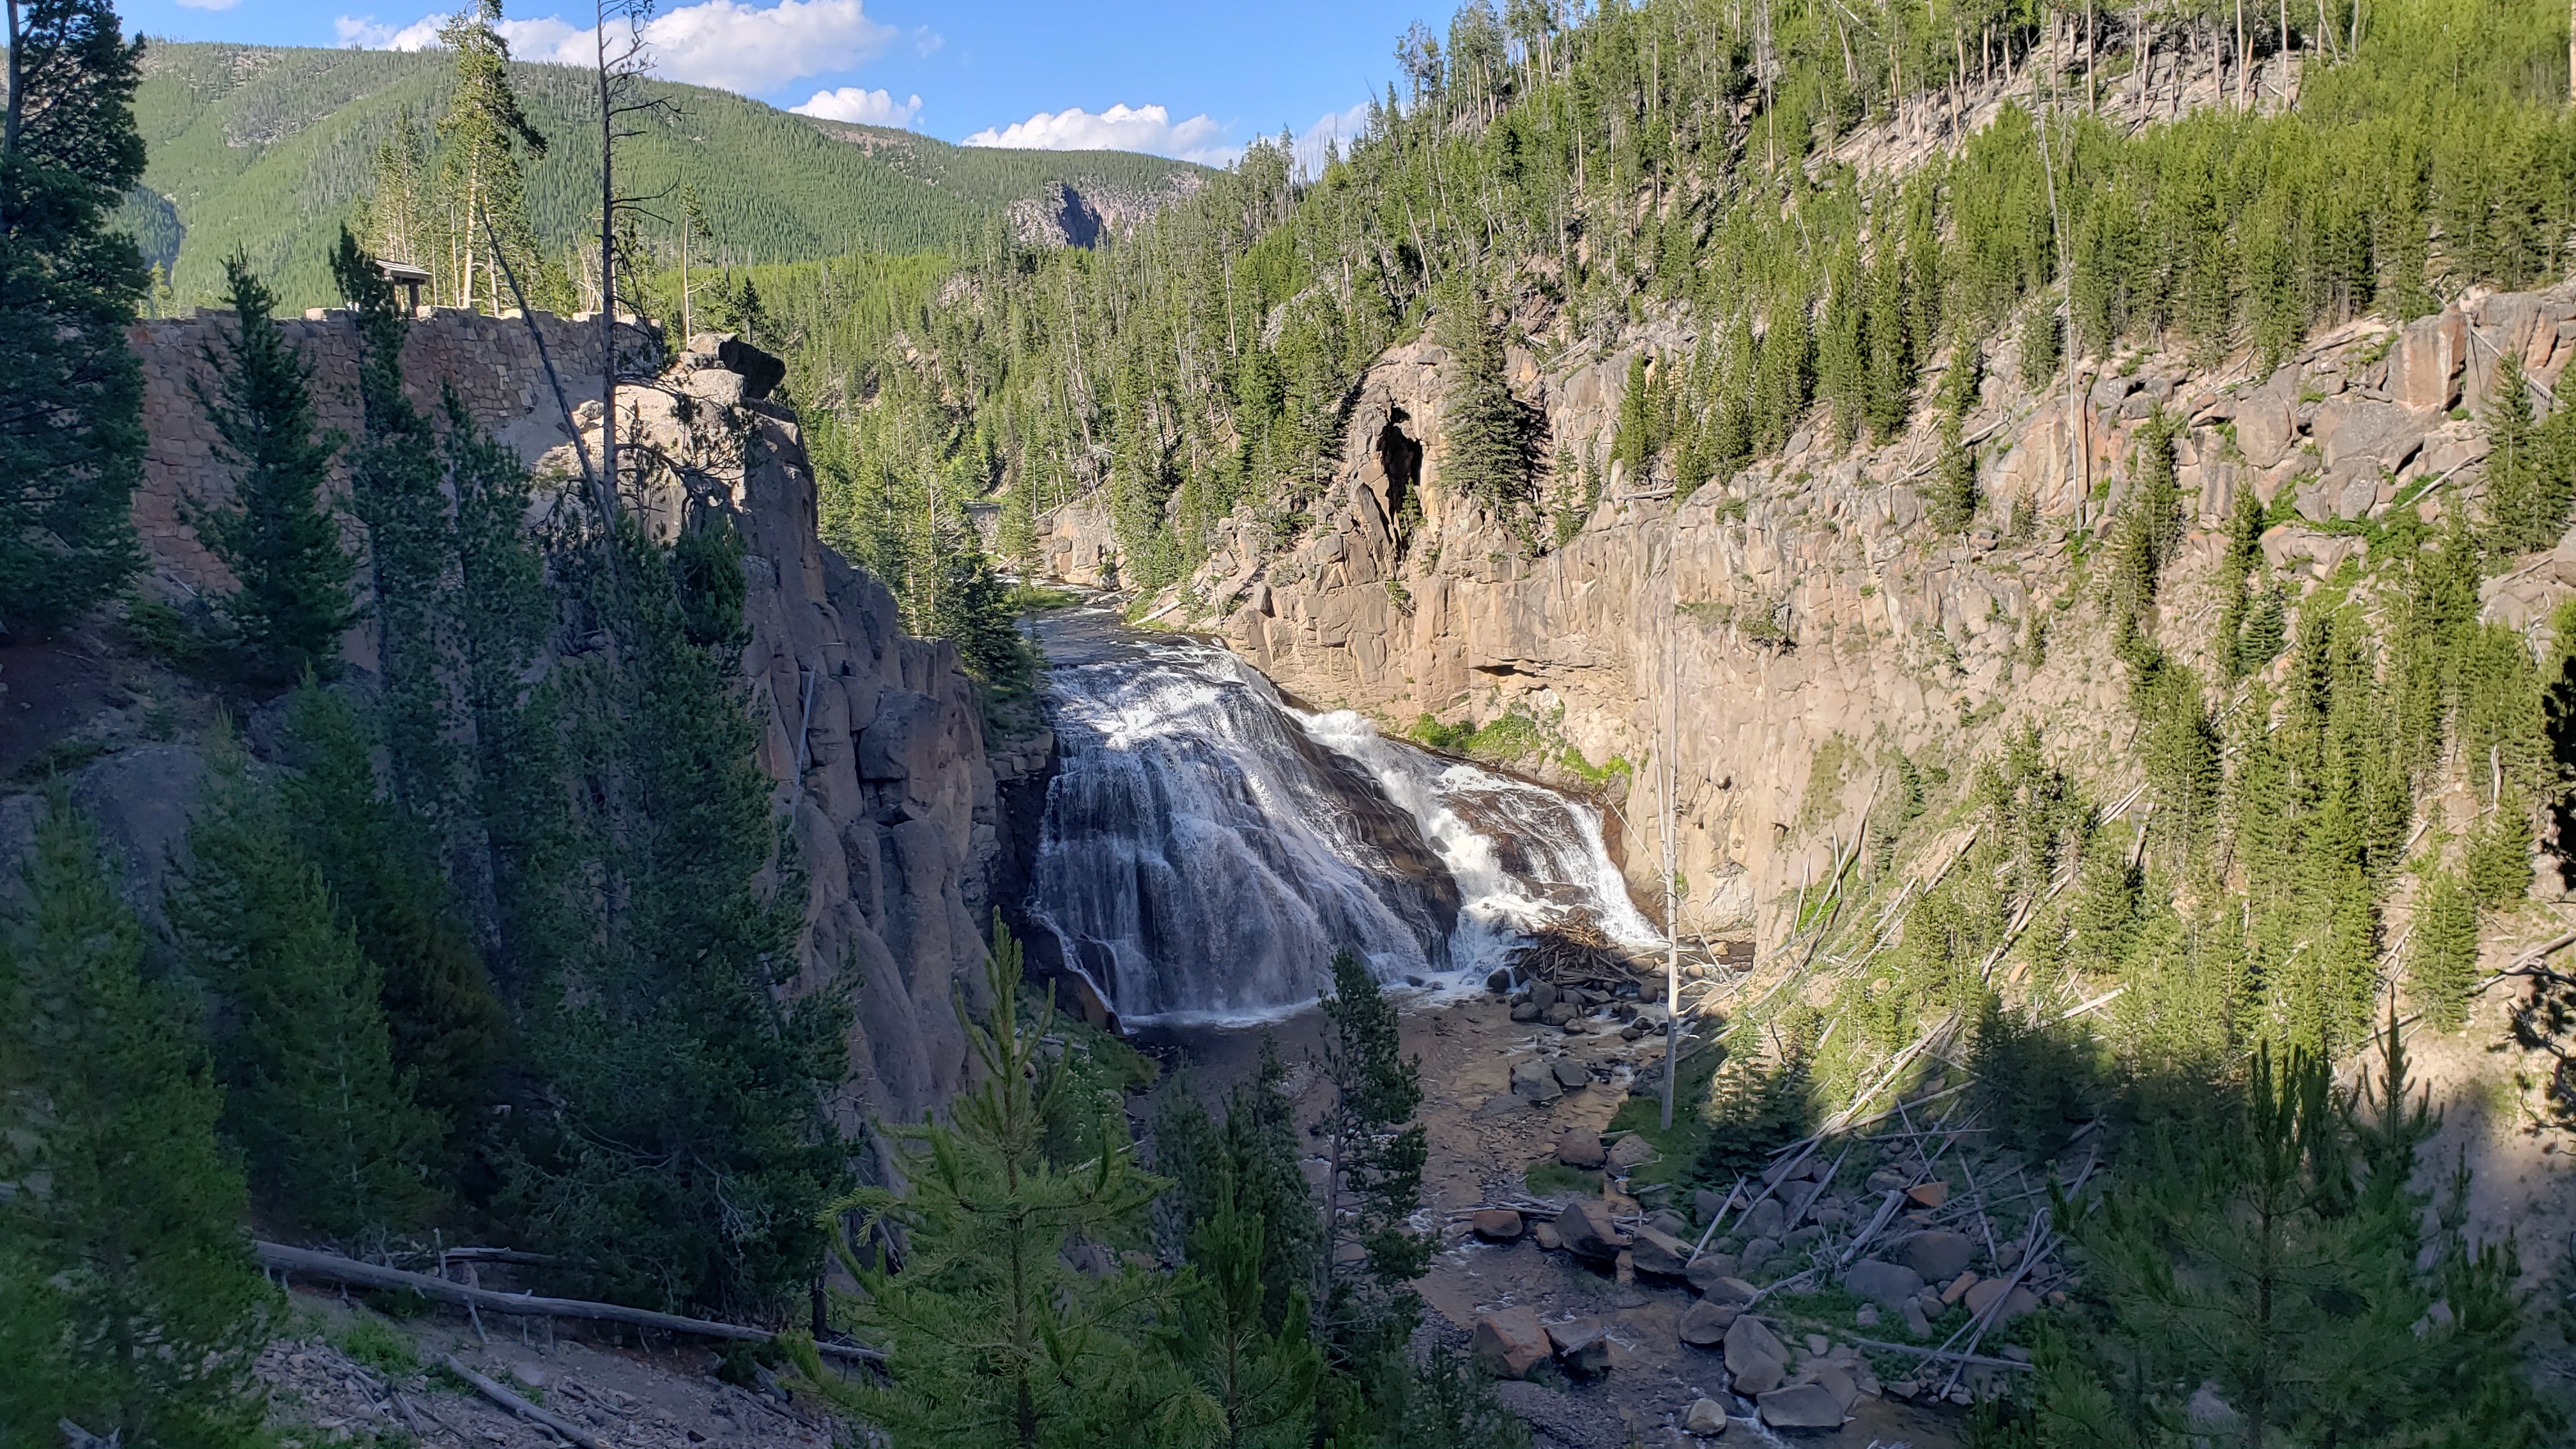 The majesty of Gibbon Falls in Yellowstone